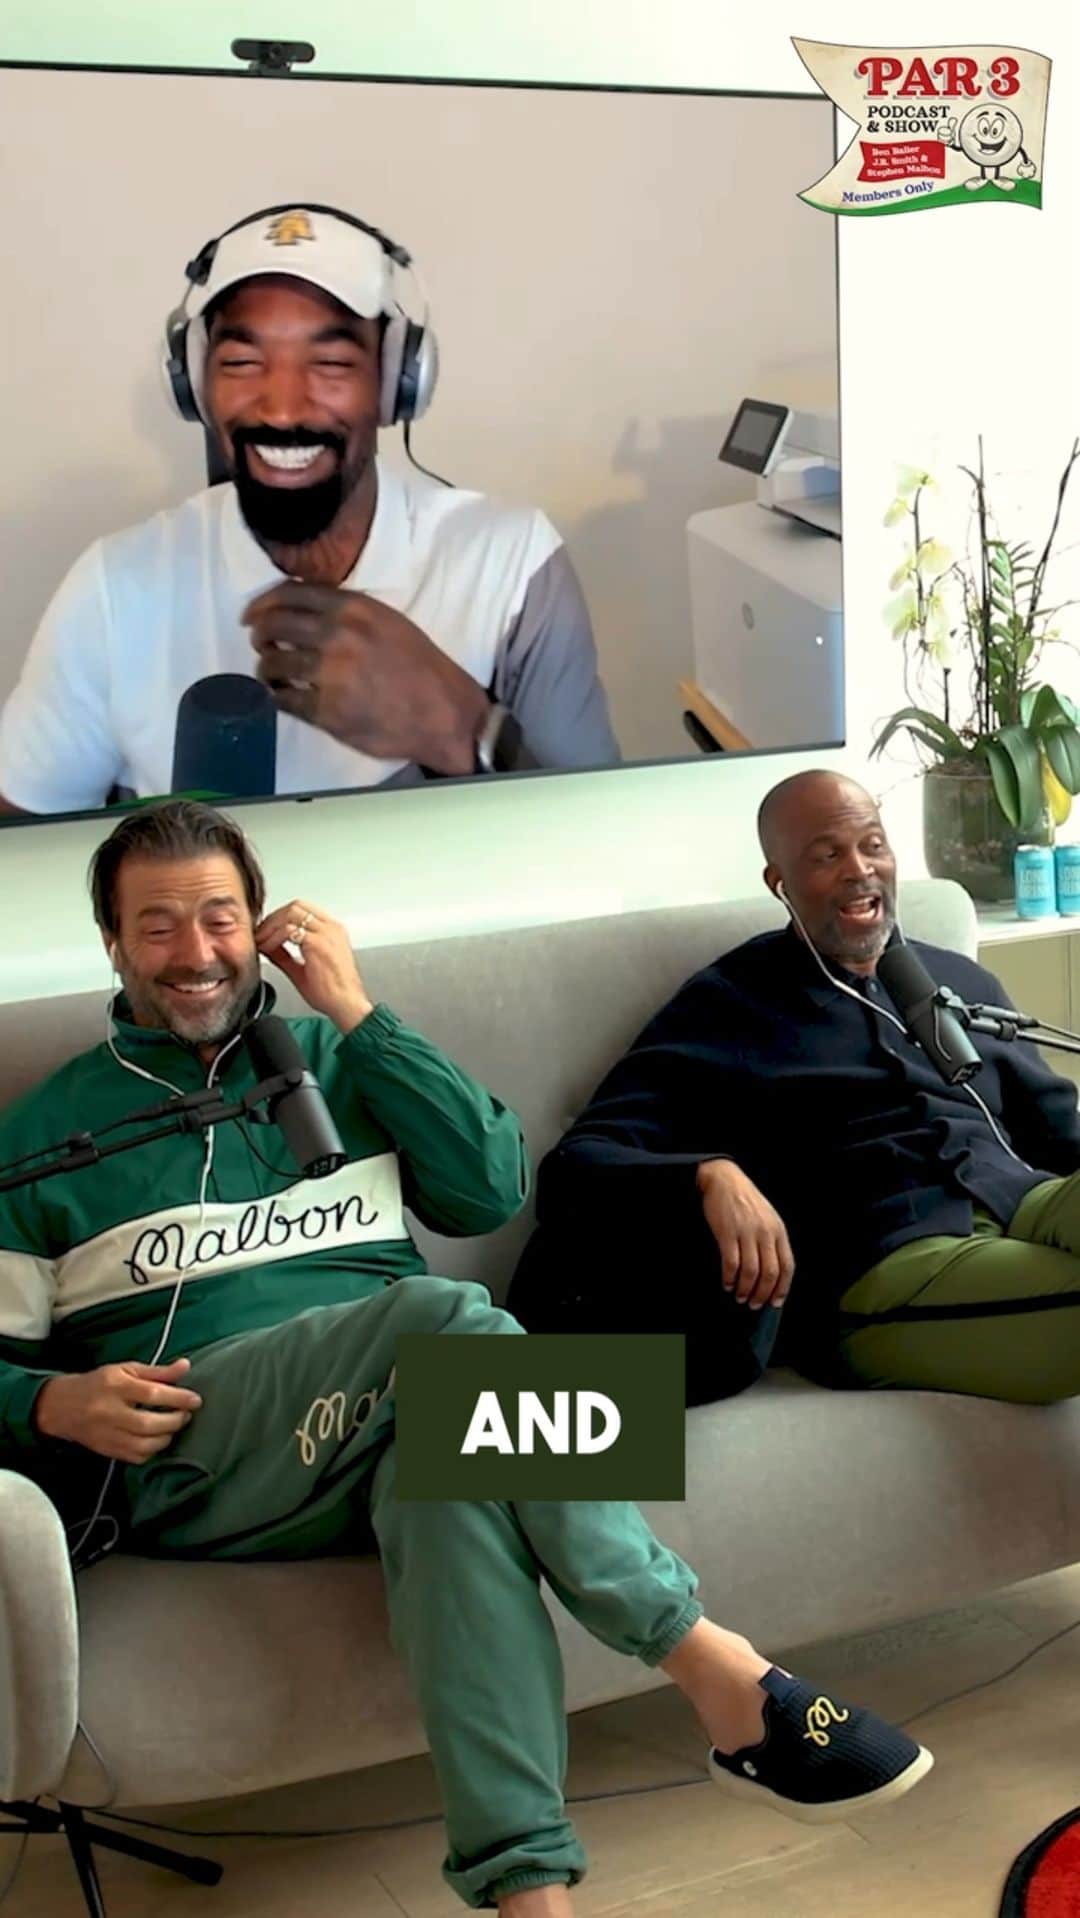 J・R・スミスのインスタグラム：「The gift shop is always a vibe 😂 you never know what you might find lol. Check out the latest episode of the @par3podcast with my boy @therealchrisspencer and the guys. Link in bio」